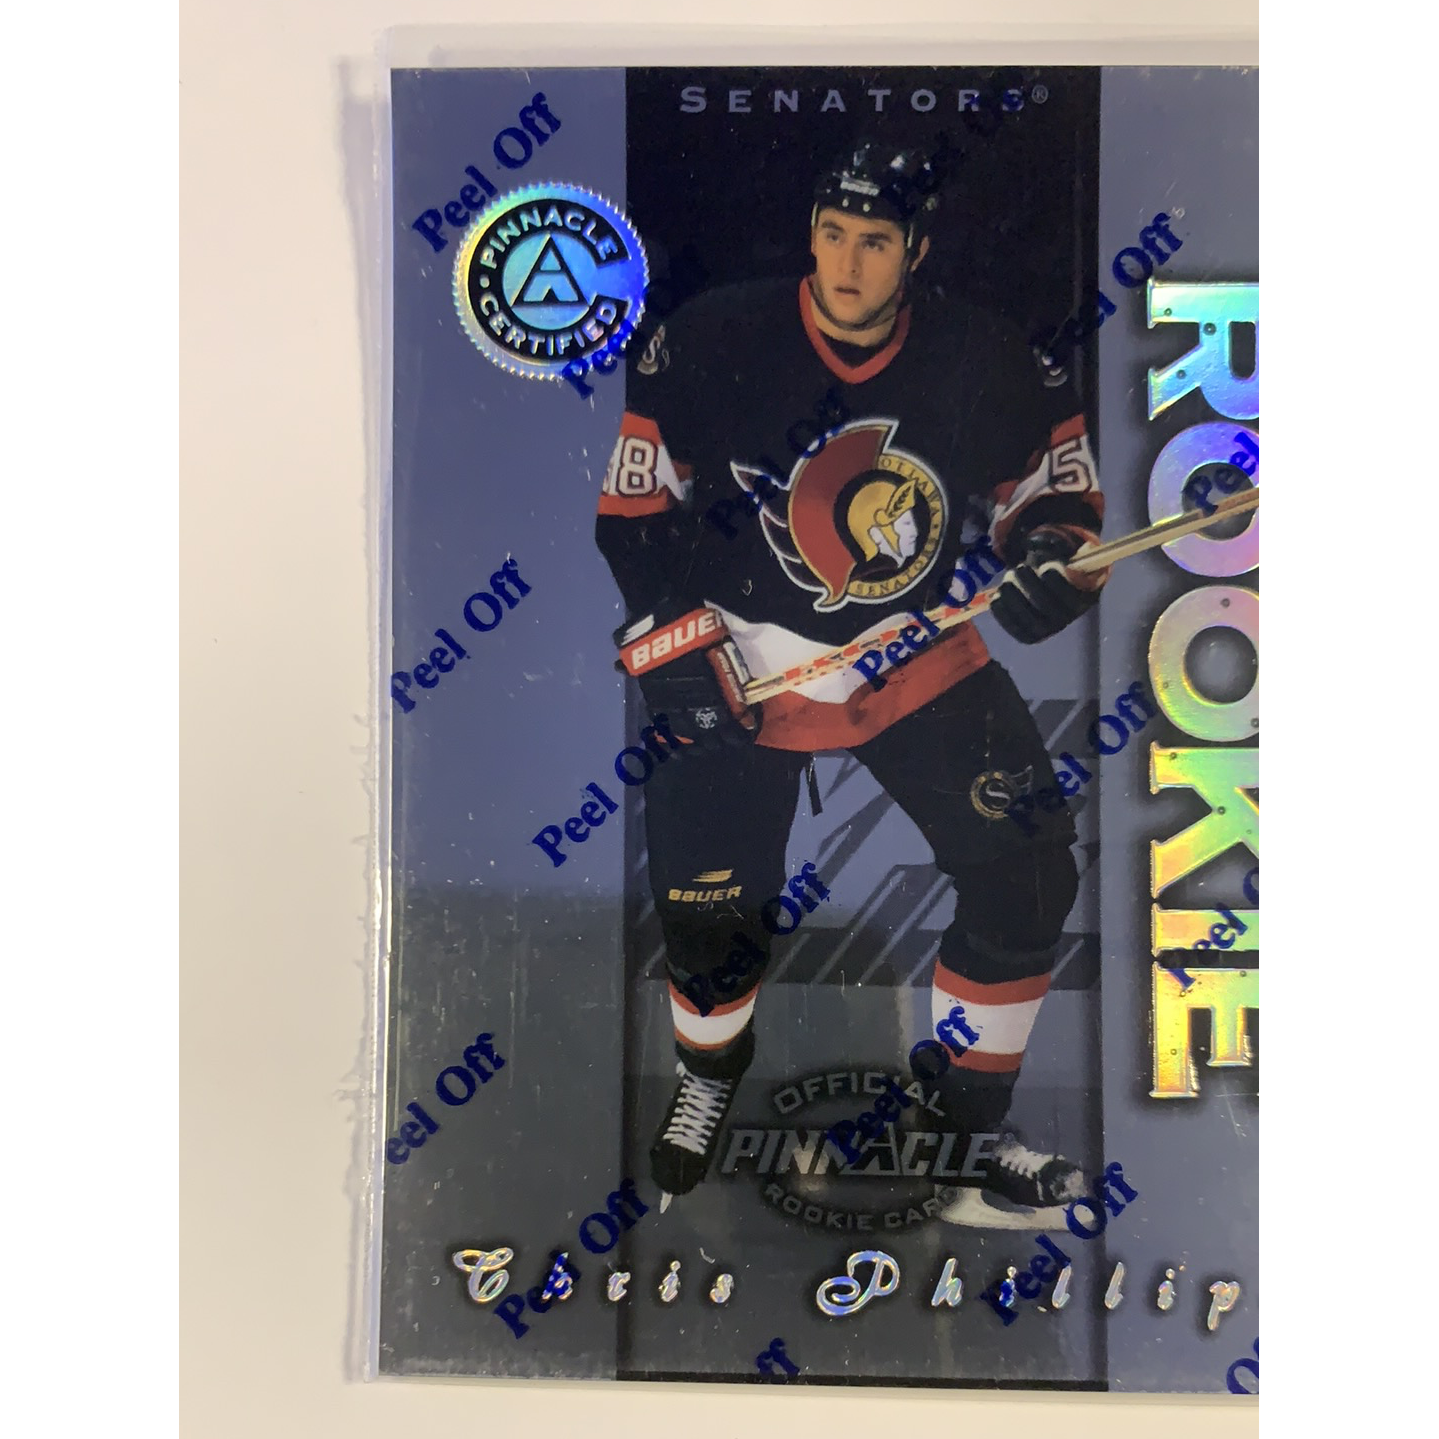  1997-98 Pinnacle Certified Chris Phillips Rookie Card  Local Legends Cards & Collectibles